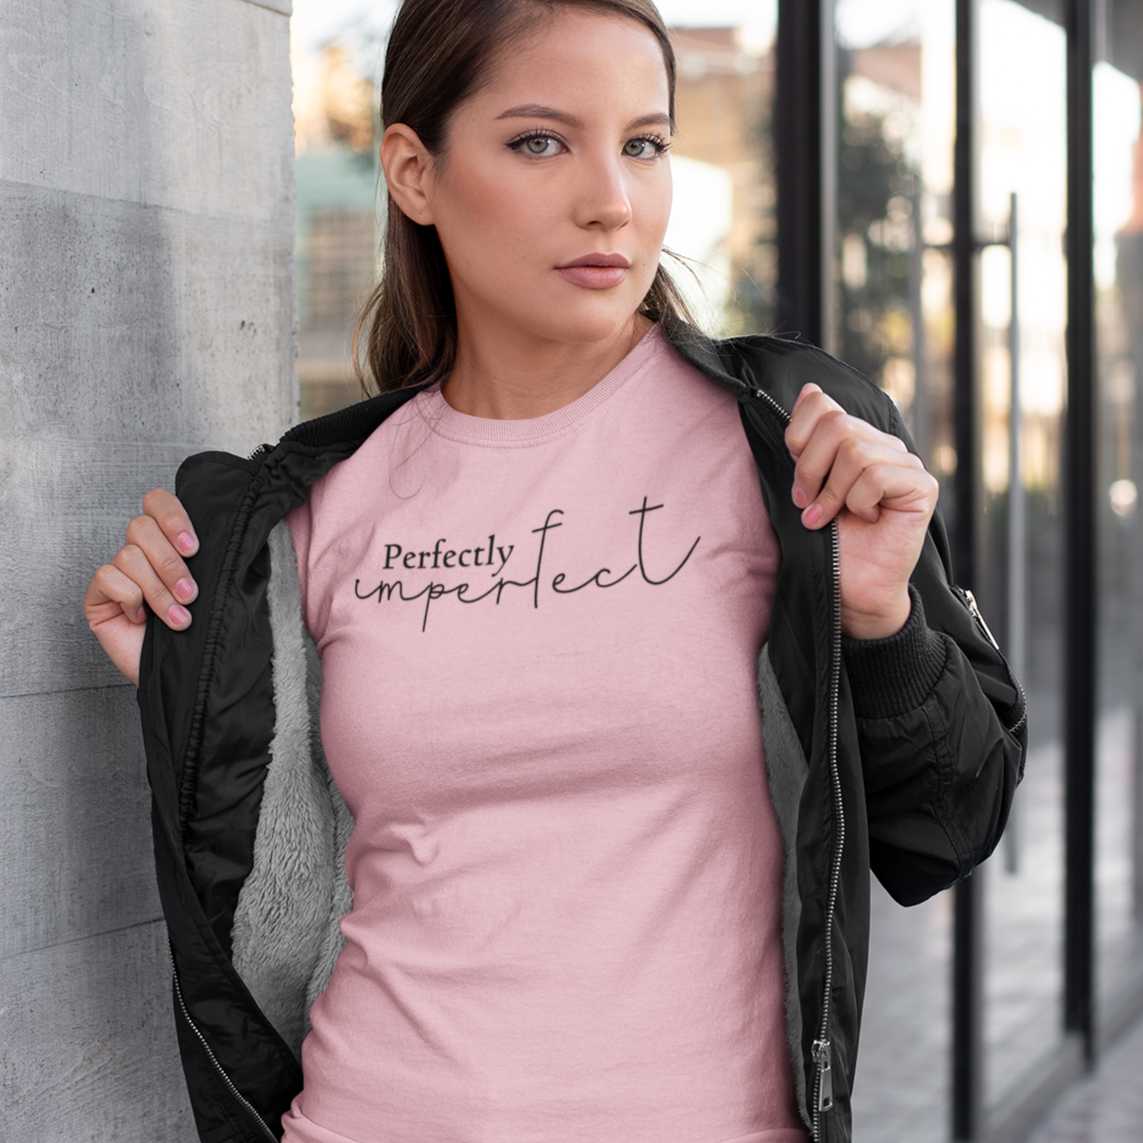 perfectly-imperfect-pink-t-shirt-womens-mockup-of-a-woman-showing-off-the-teet-under-her-bomber-jacket